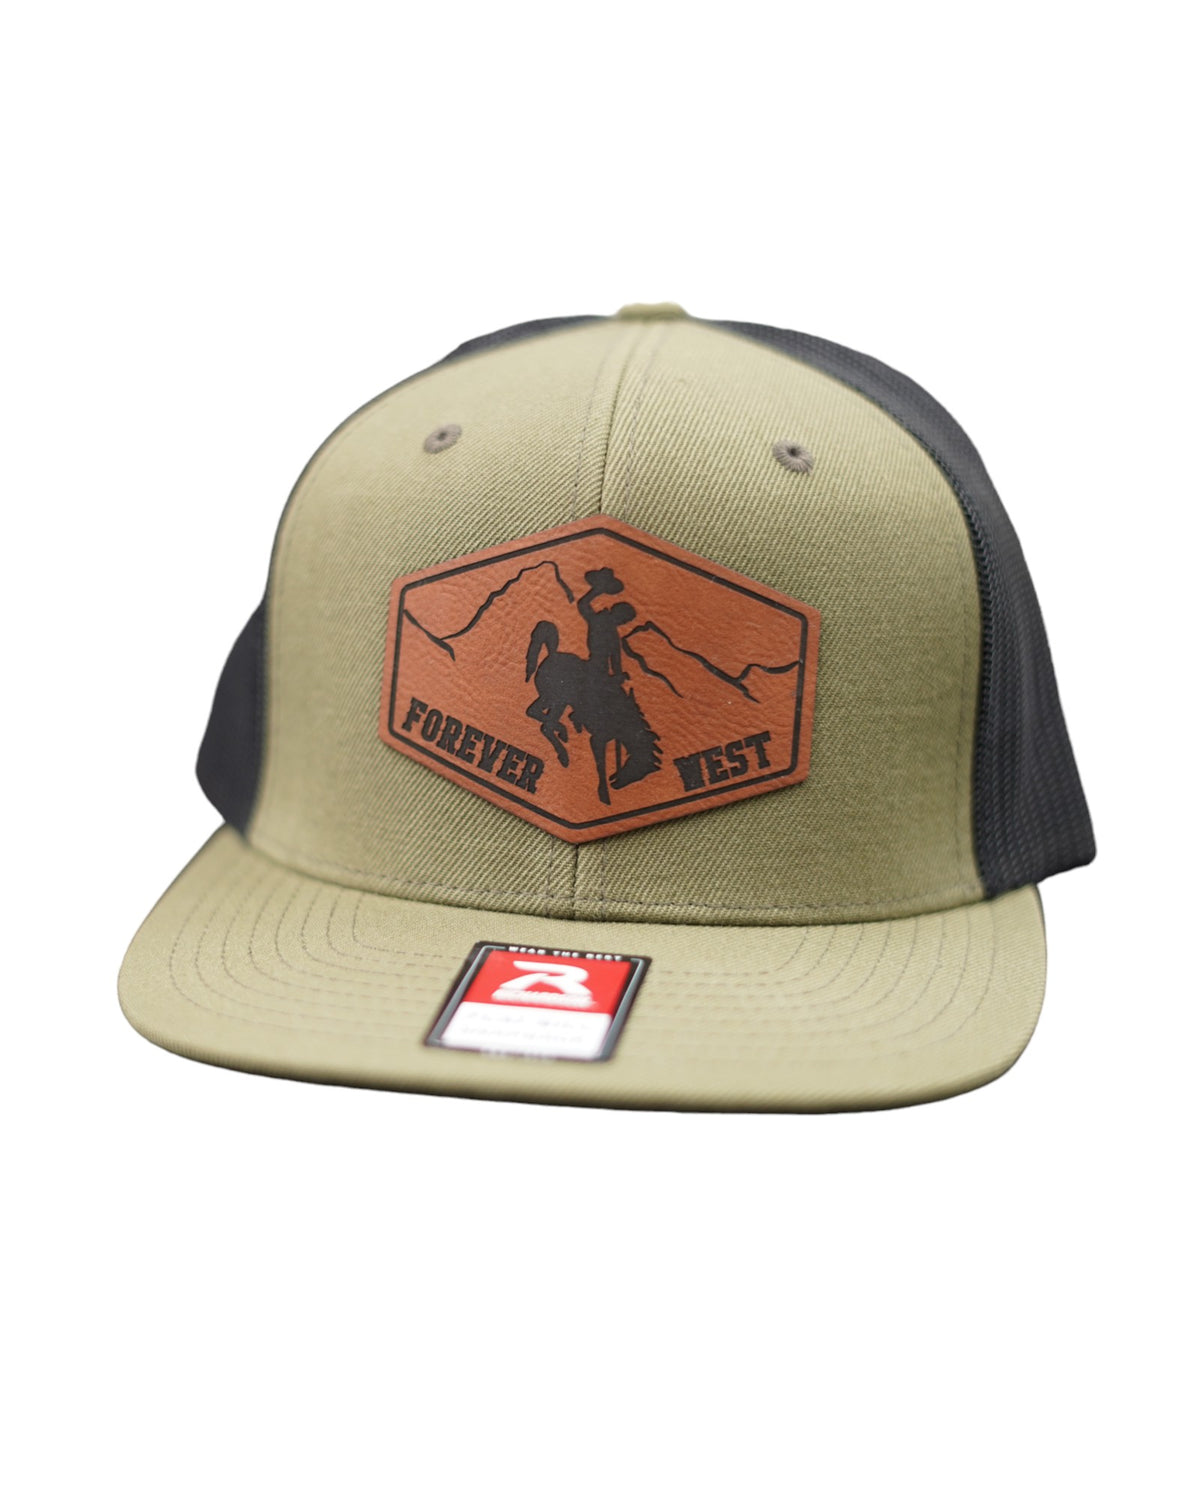 Wyoming Forever West Hat